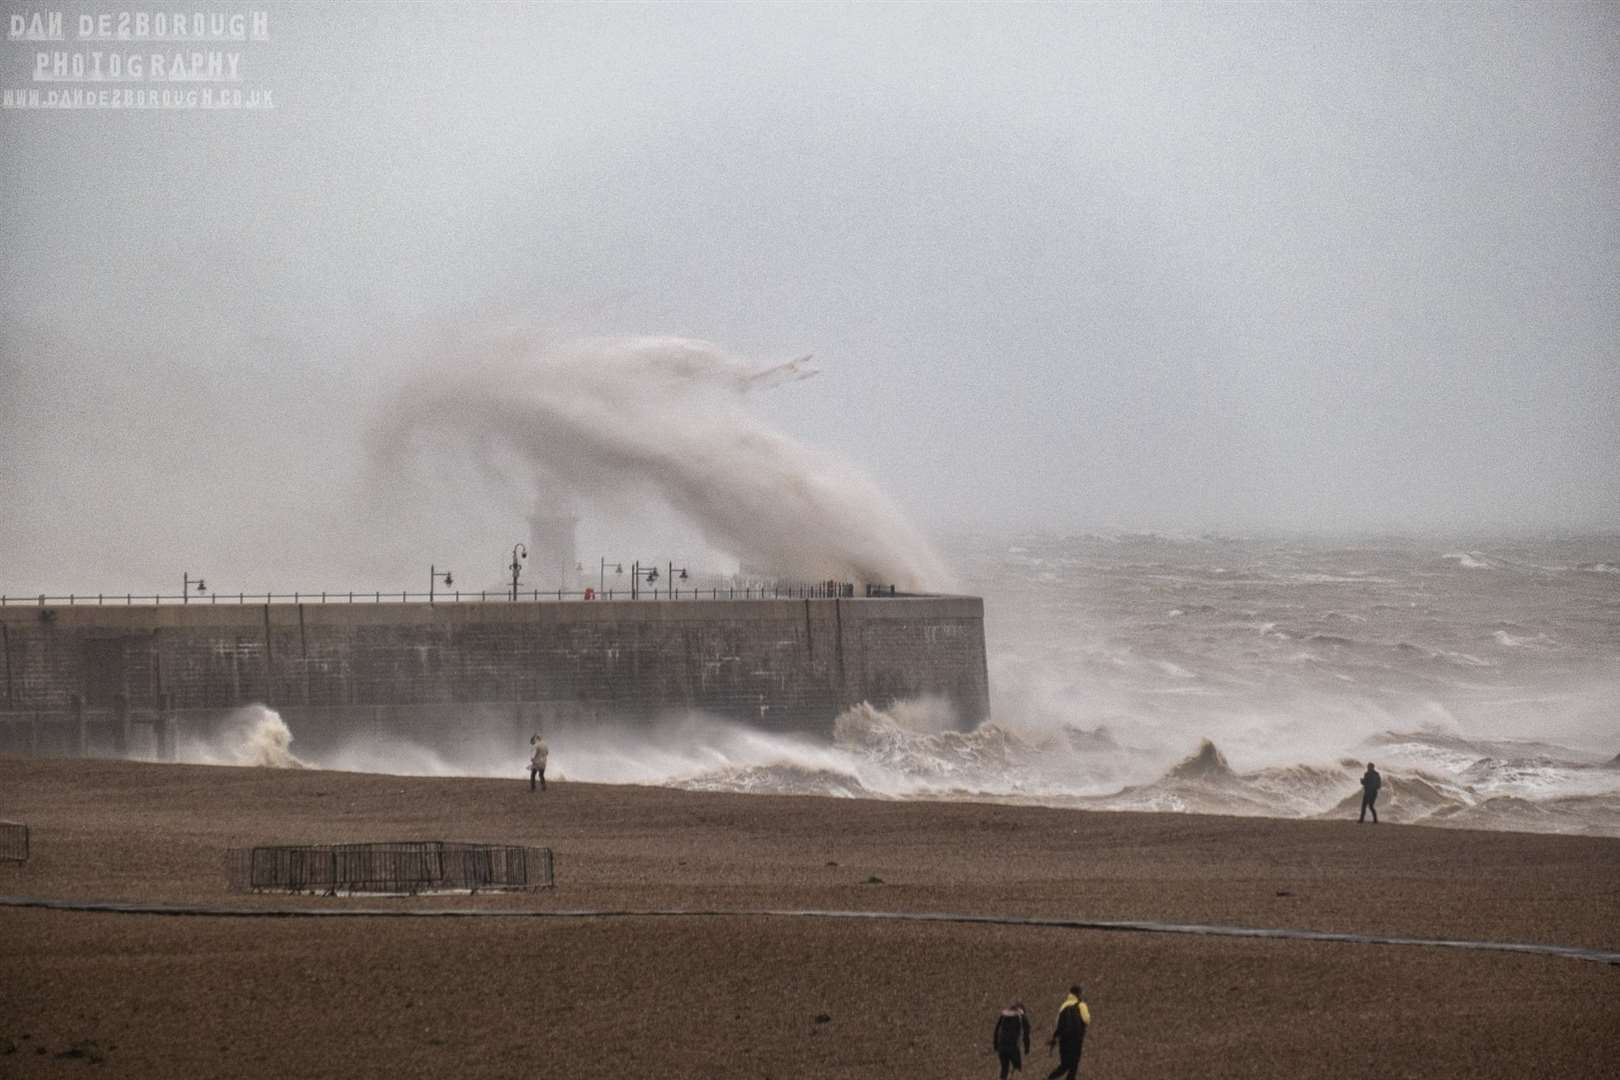 The waves are hammering Folkestone's Harbour Arm. Picture: Dan Desborough Photography